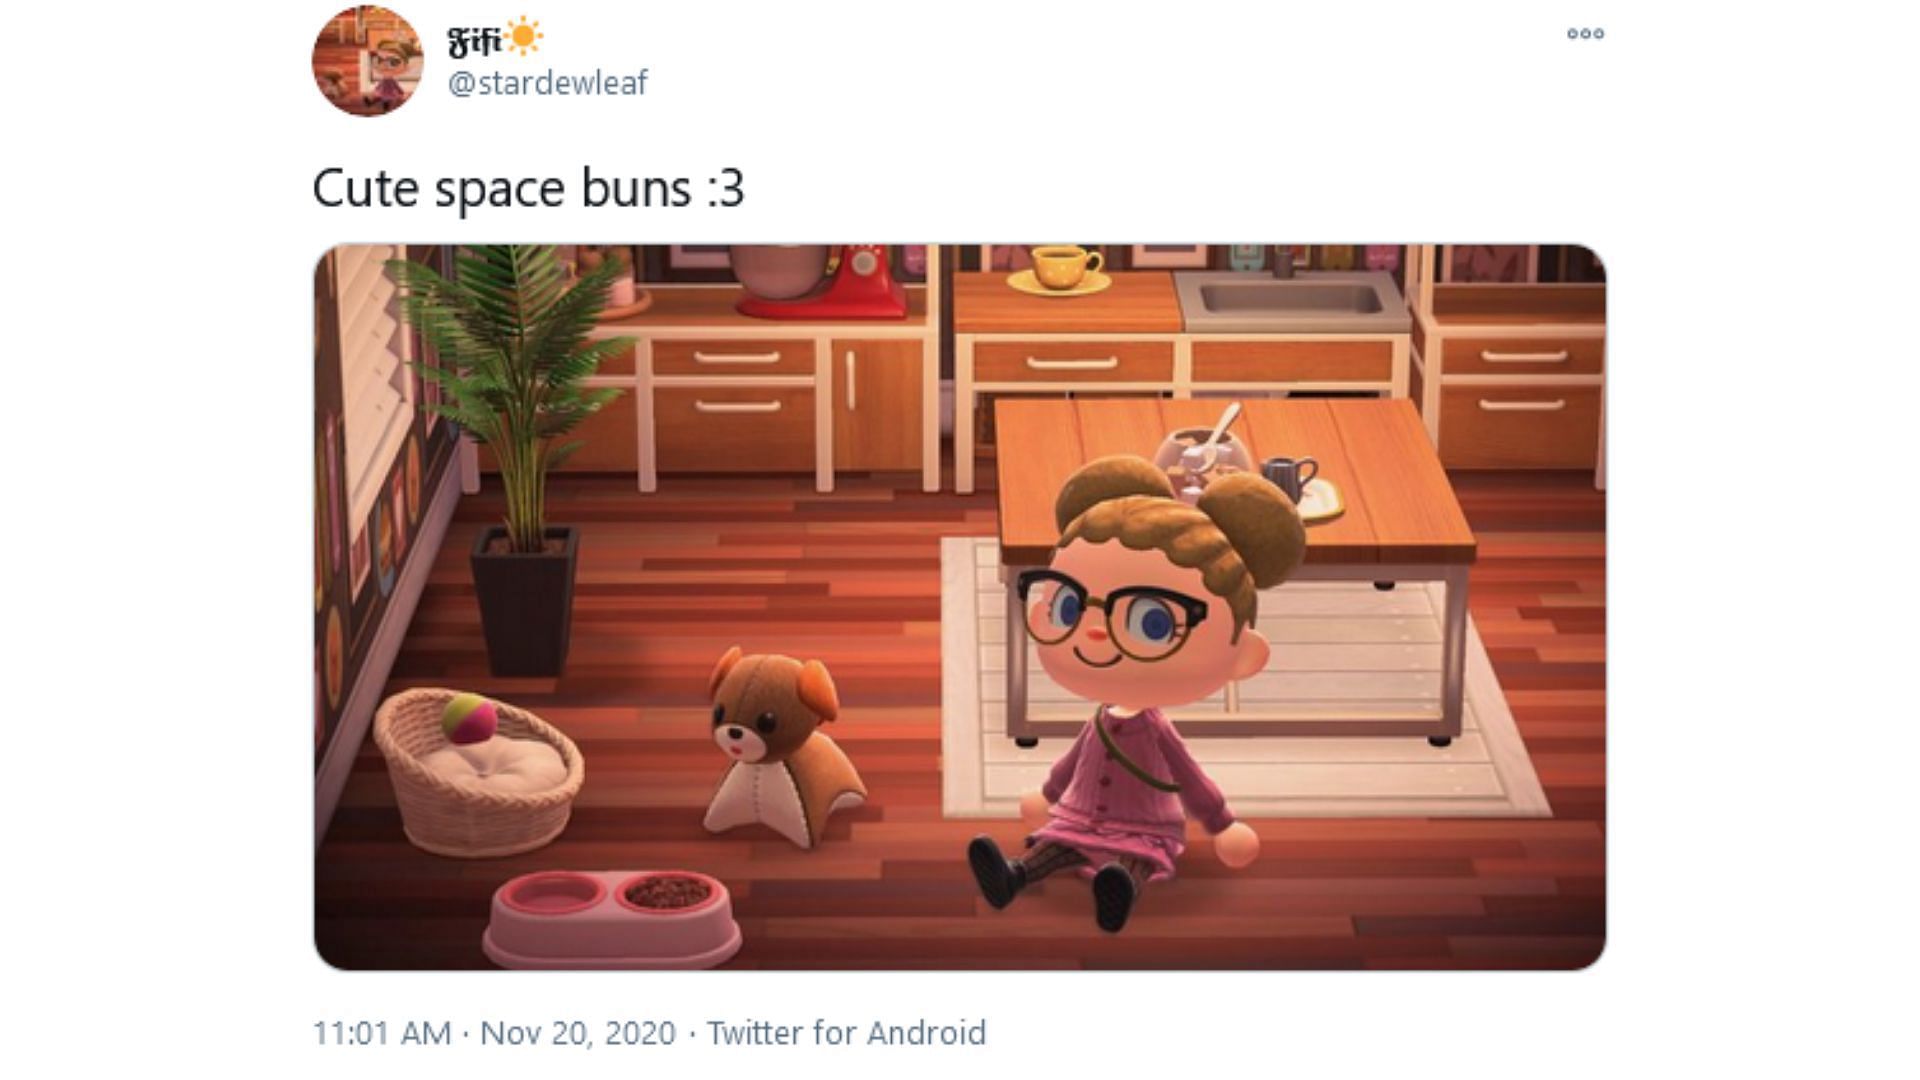 To get the bun buns ban from Roblox